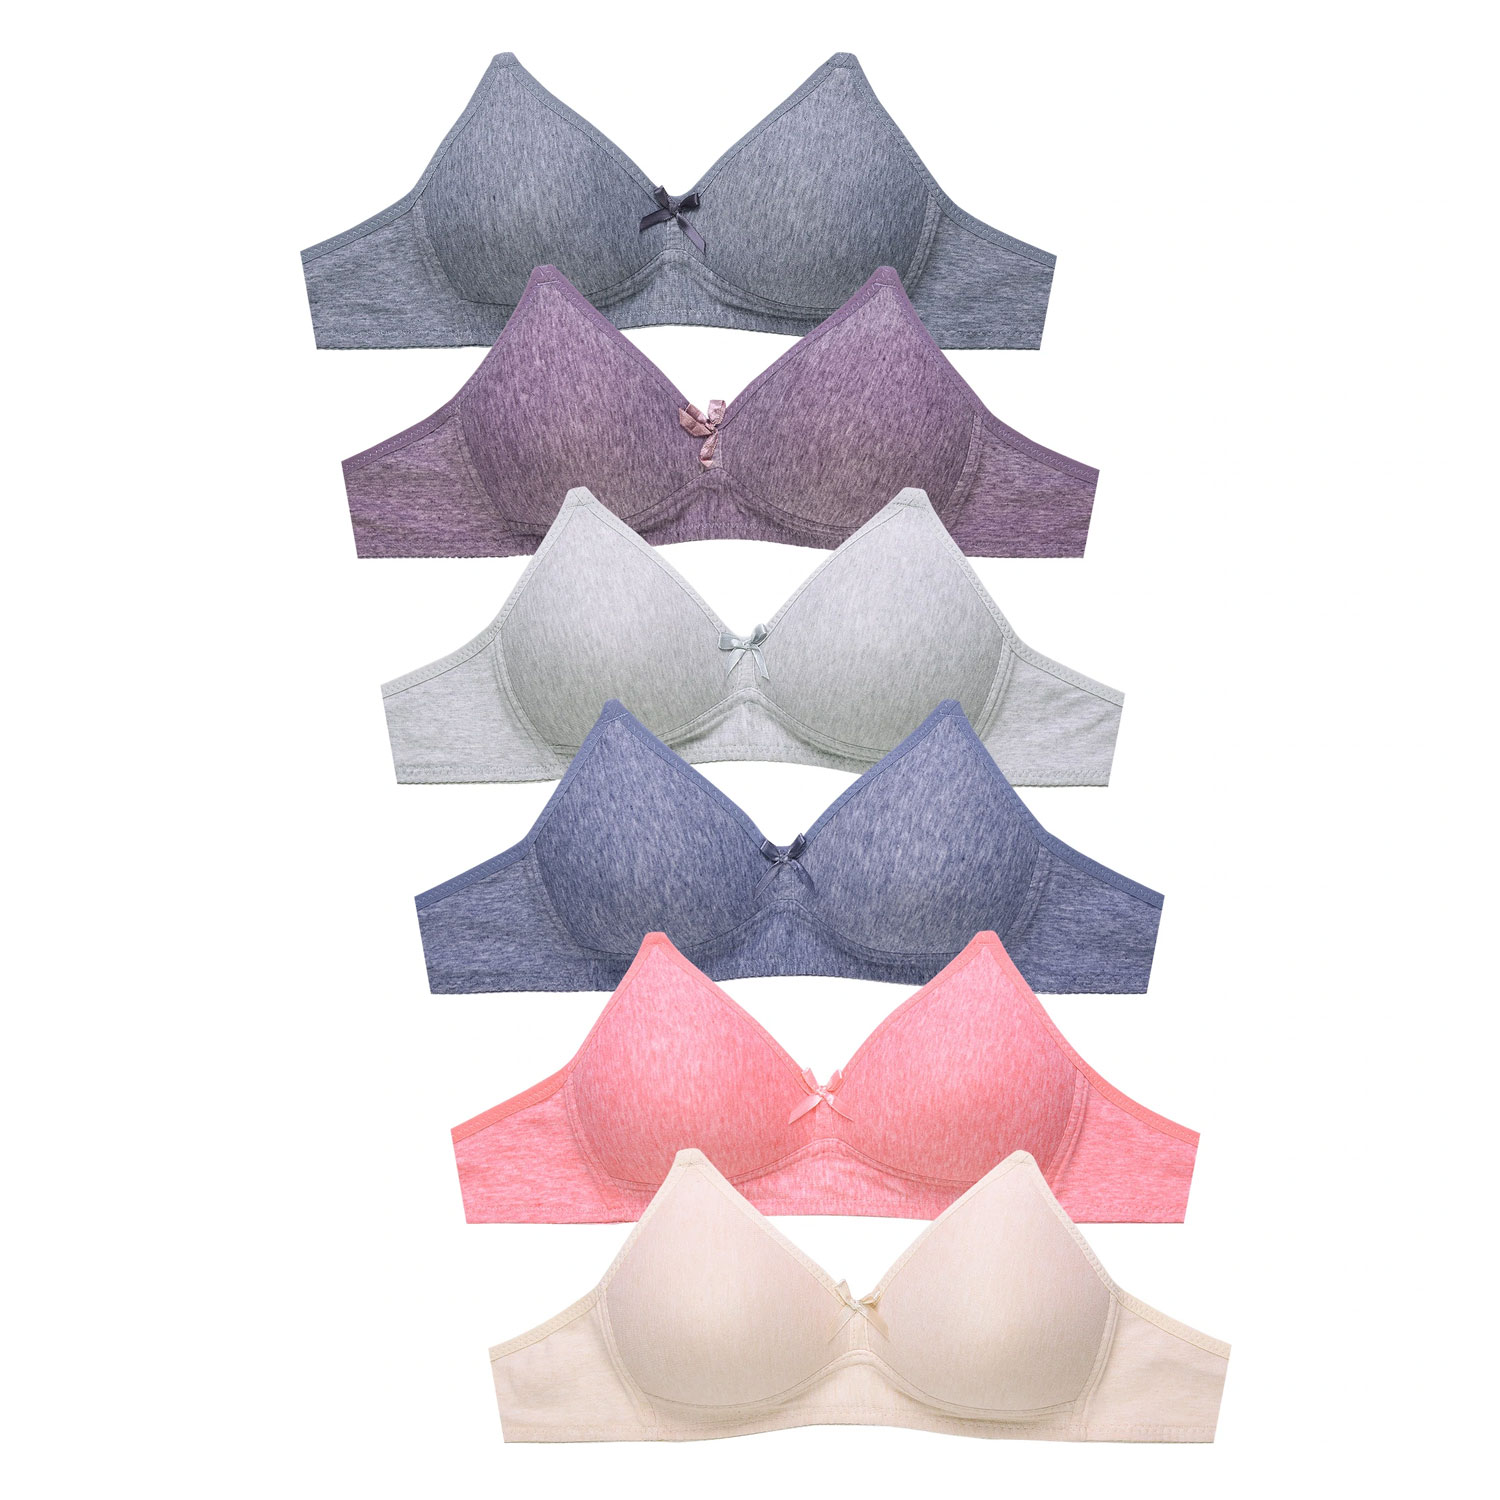 Sofra Ladies No Wire Cotton Bra Pack Of 6